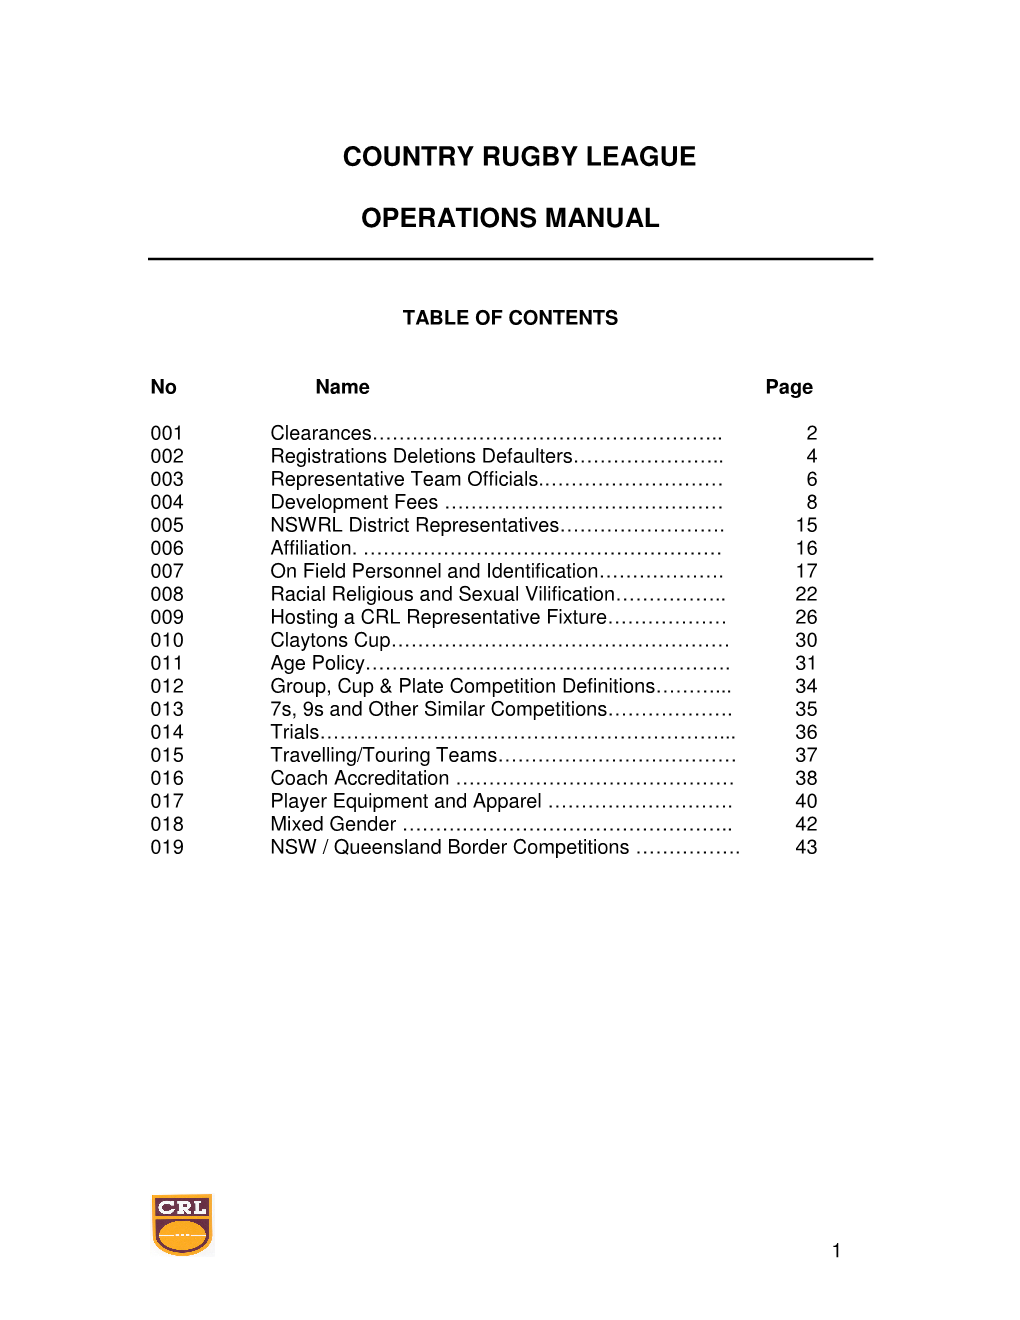 Country Rugby League Operations Manual